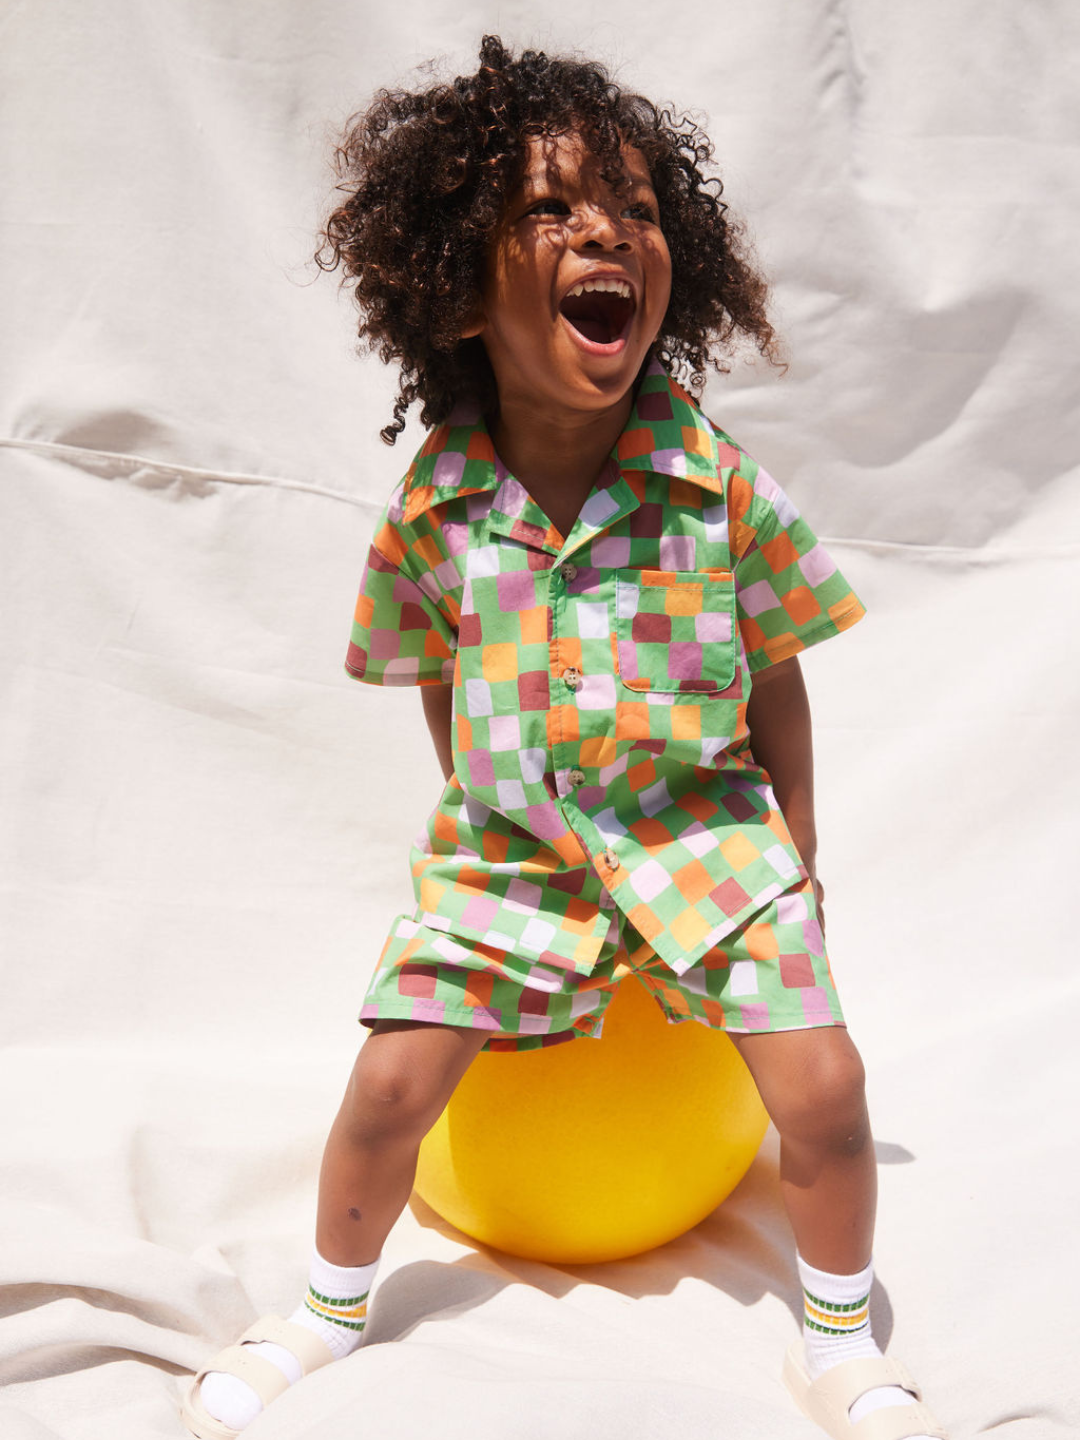 Green | A child sitting on a ball, wearing a kids' shirt and shorts set in a pattern of purple, prink, gold and orange squares on a green background